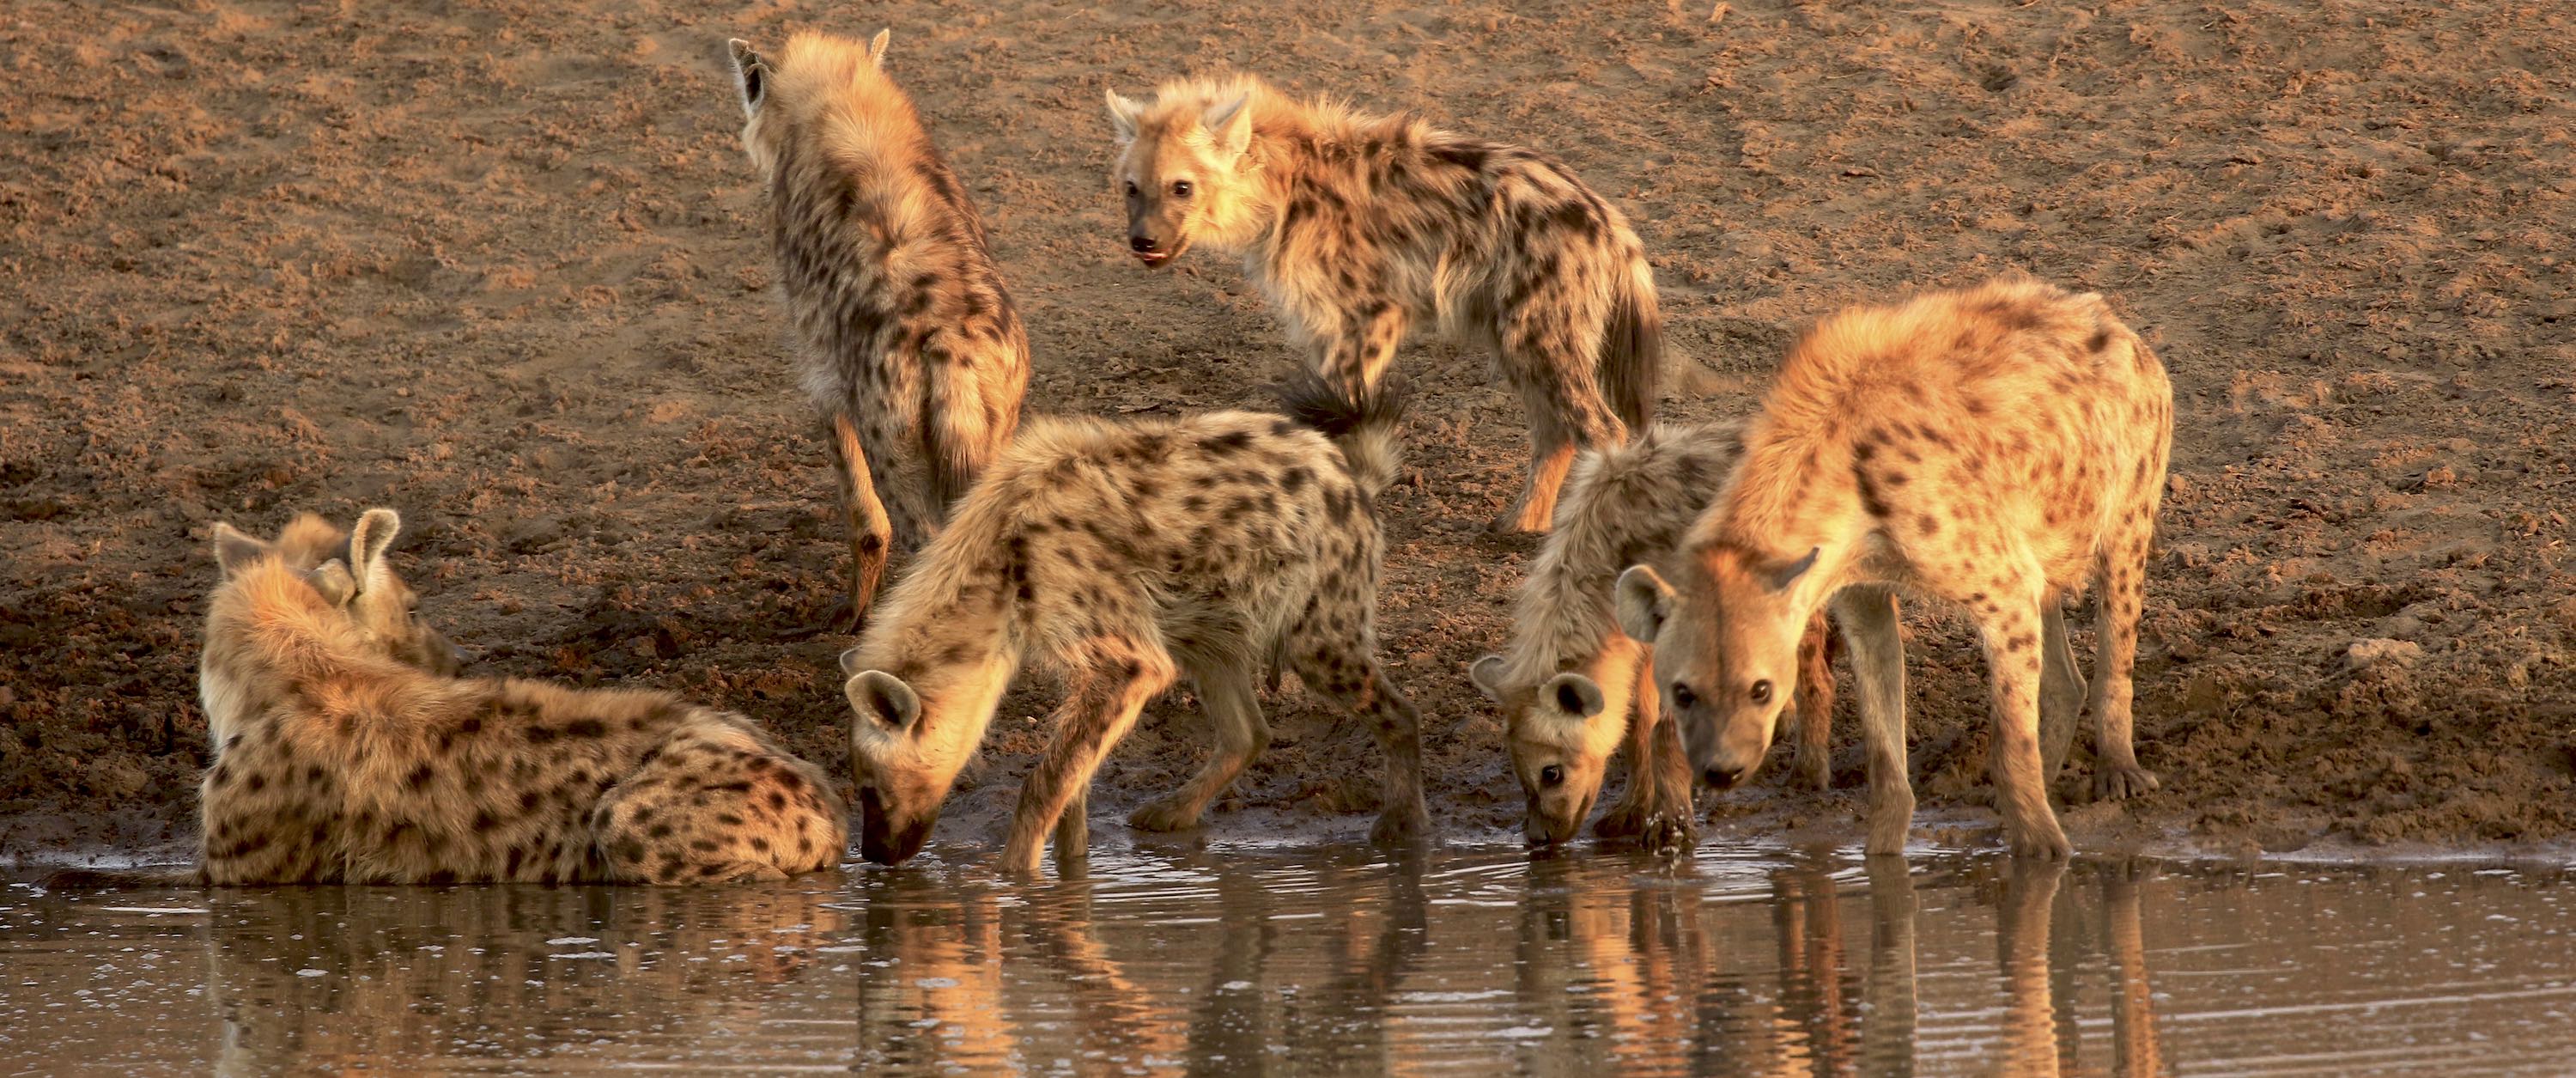 A group of spotted hyenas drinking at a waterhole.